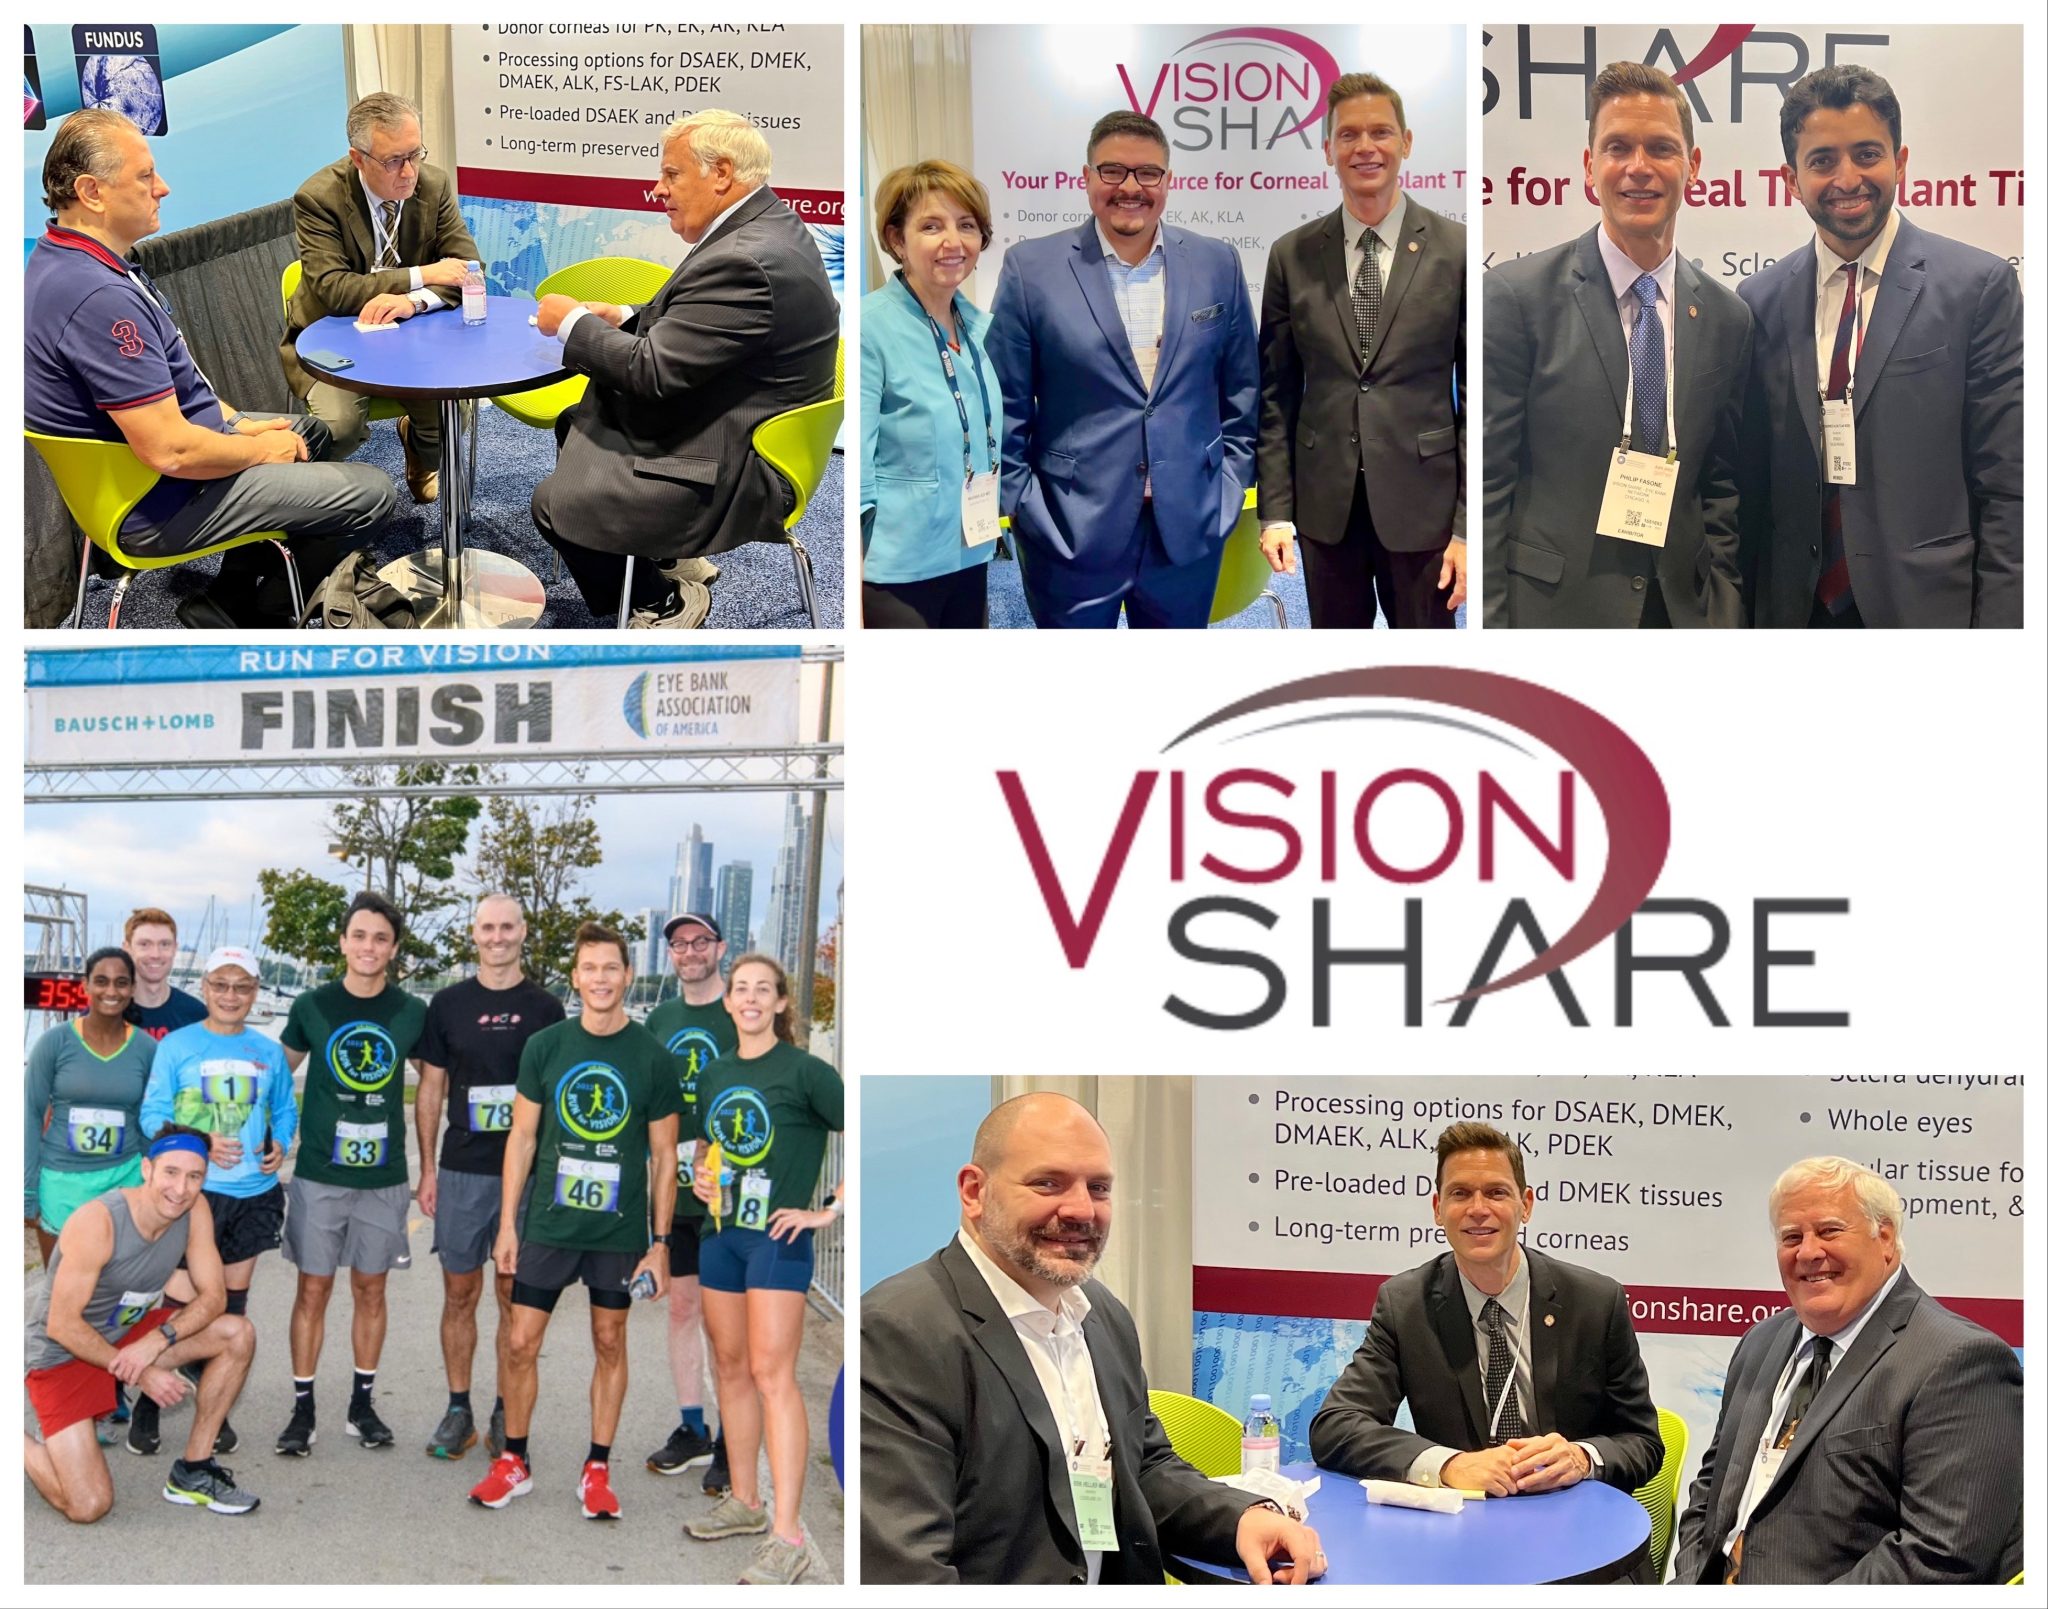 Vision Share Exhibited in Chicago at World Cornea Congress and American Academy of Ophthalmology